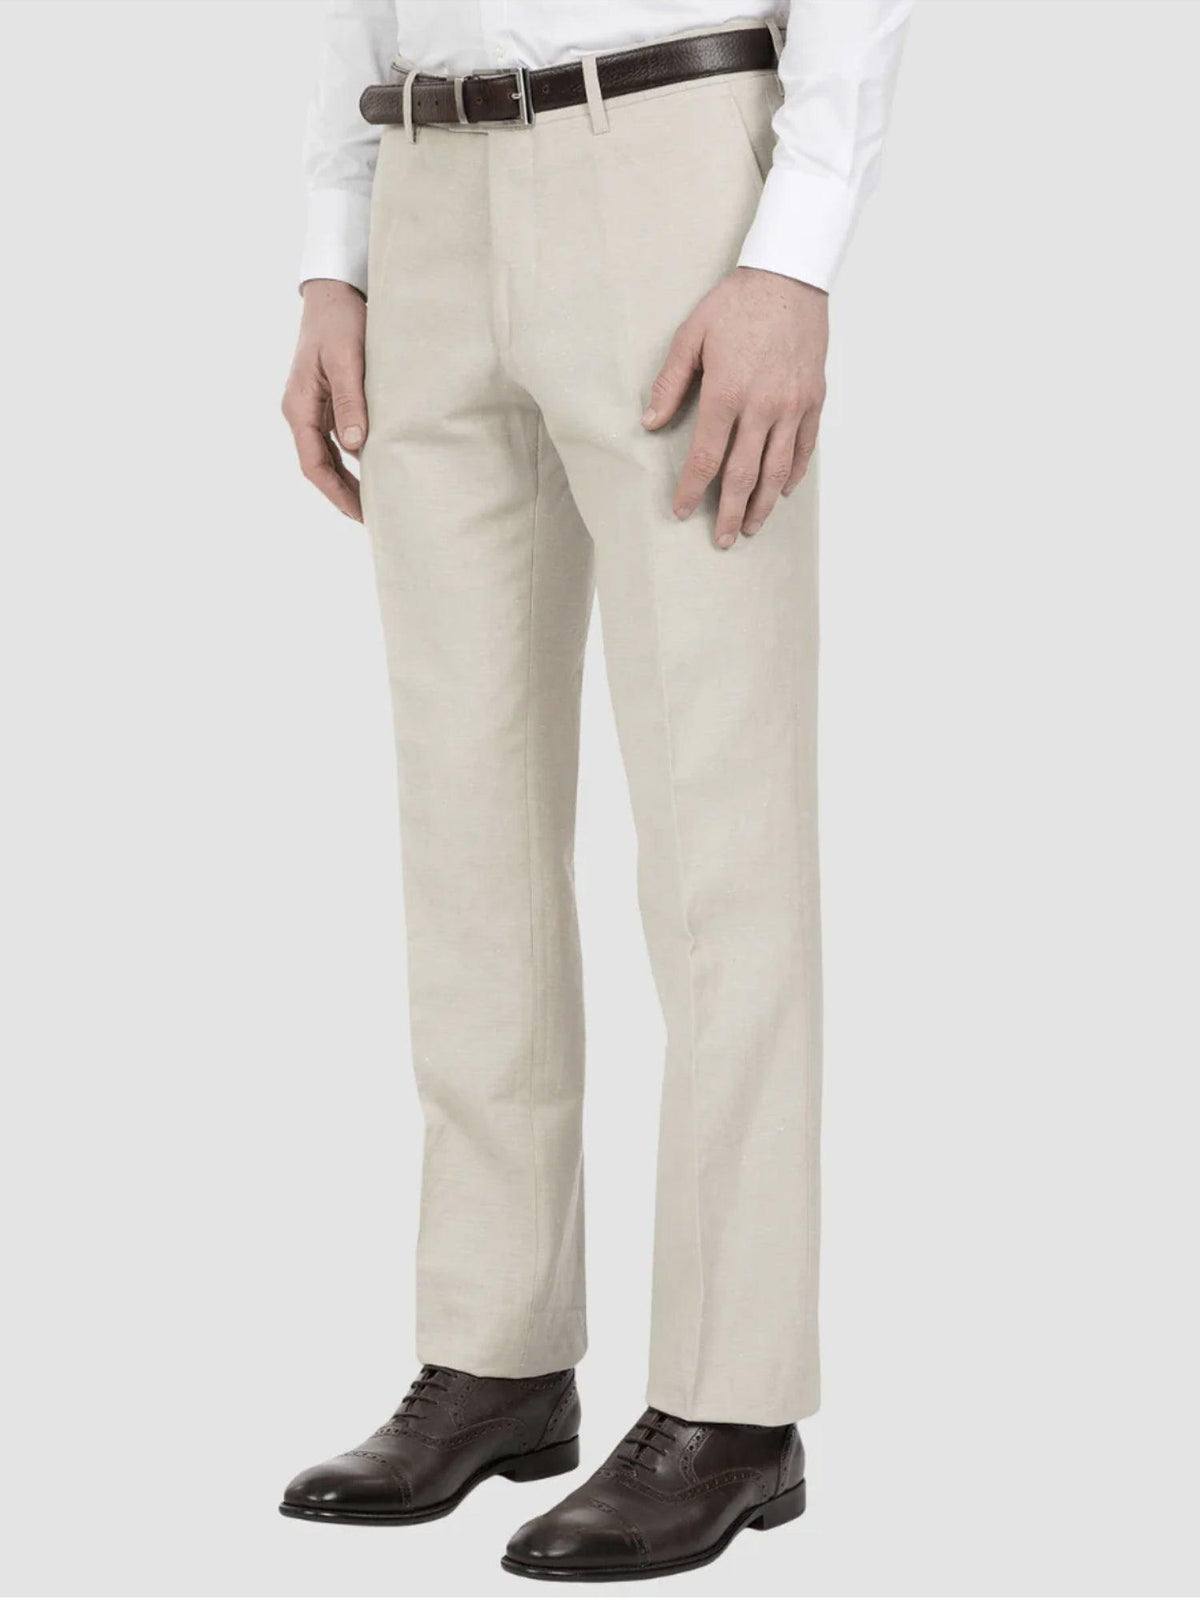 JoeJoe Trouser - 7019  https://harrysformenswear.com.au/products/louis-pant  "Slim Fit Louis" and was designed in Australia. It's made from a blend of 60% cotton and 40% linen, which suggests it may be lightweight and breathable. The blazer features a slim fit, designed to hug the wearer's body closely. It has a one-button front and jetted pockets. Additionally, there's an angled OB welt pocket…  Metafields